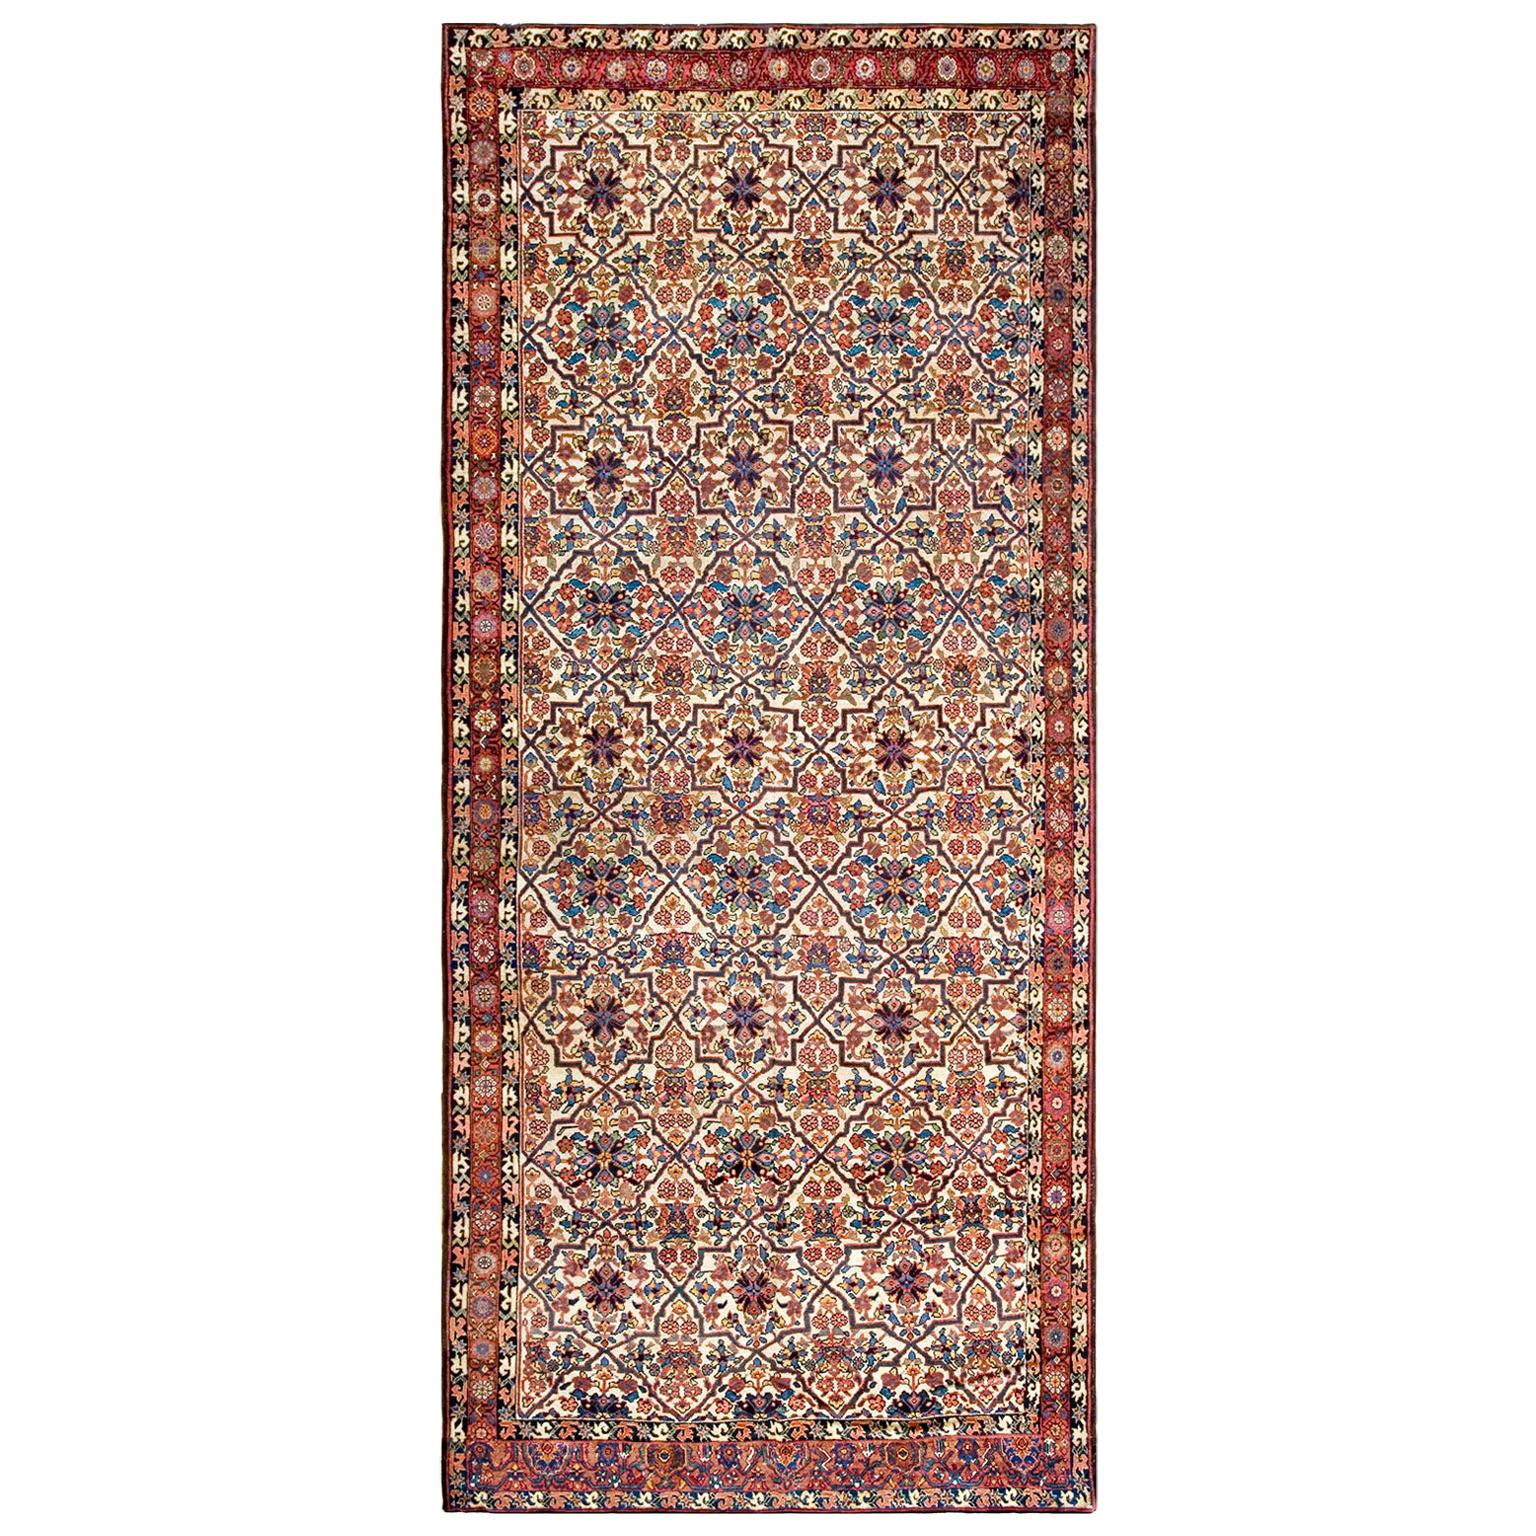 Mid 19th Century N.W. Persian Carpet ( 6'4" x 14'7" - 193 x 445 ) For Sale